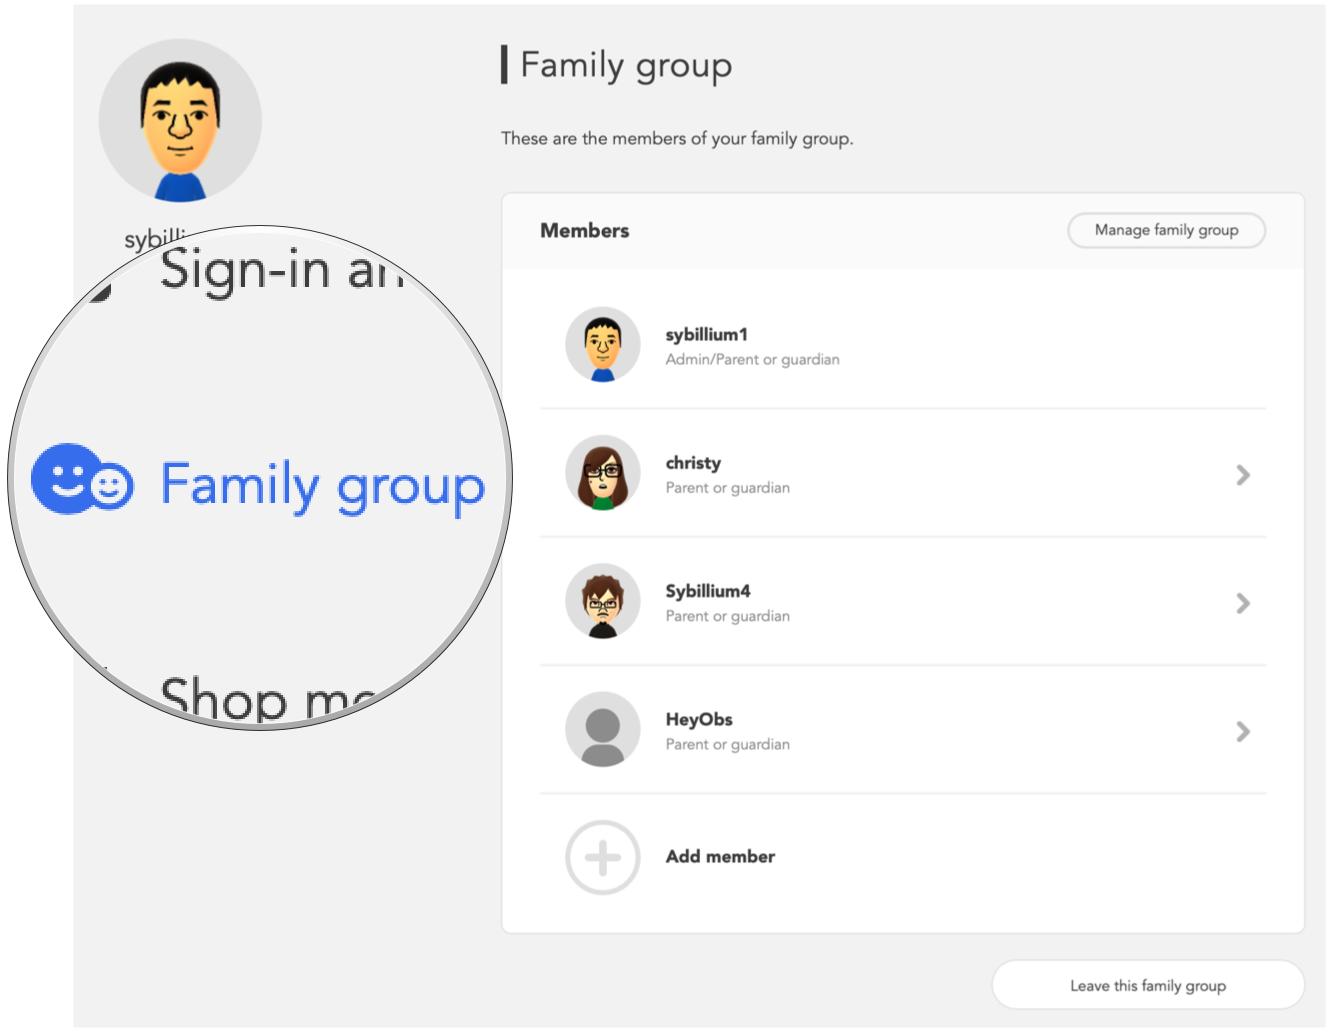 nintendo switch online family group